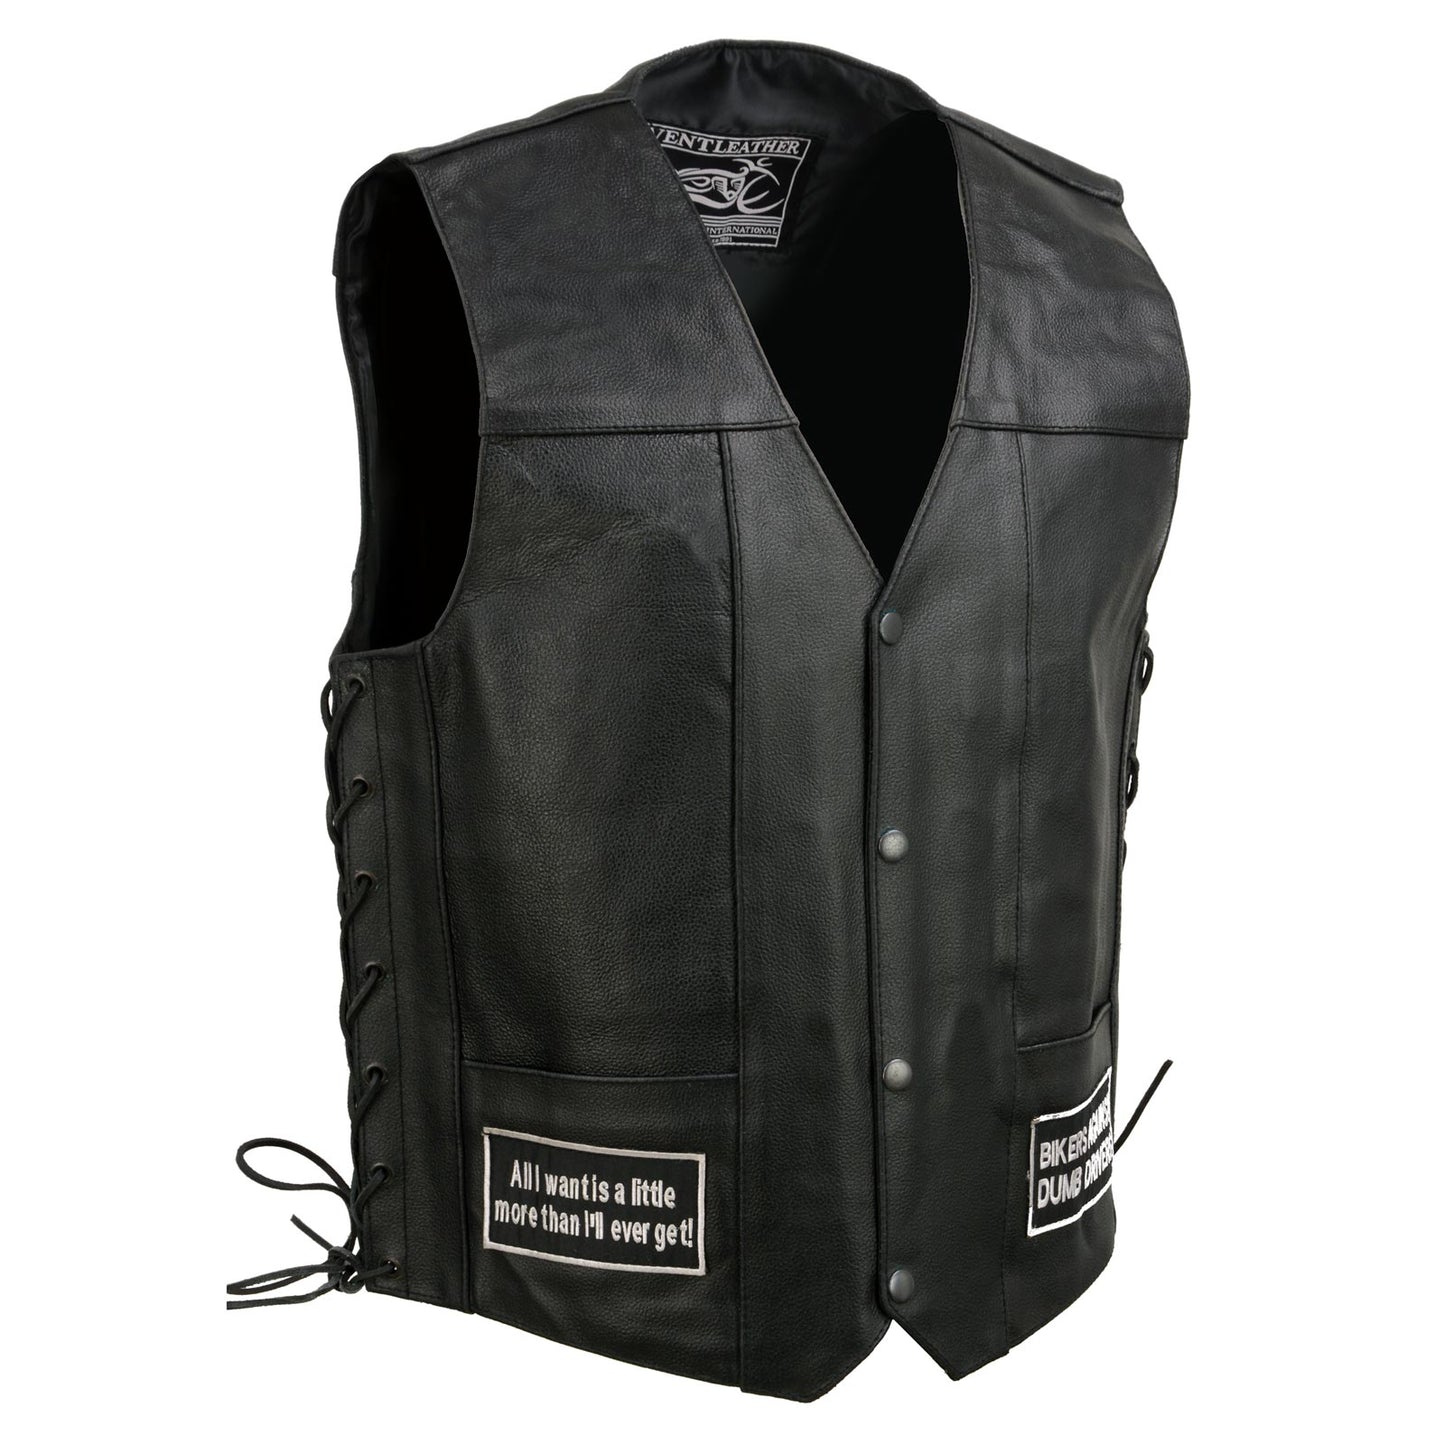 Event Leather ELM3925 Black Motorcycle Leather Vest for Men w/ Patches - Riding Club Adult Motorcycle Vests